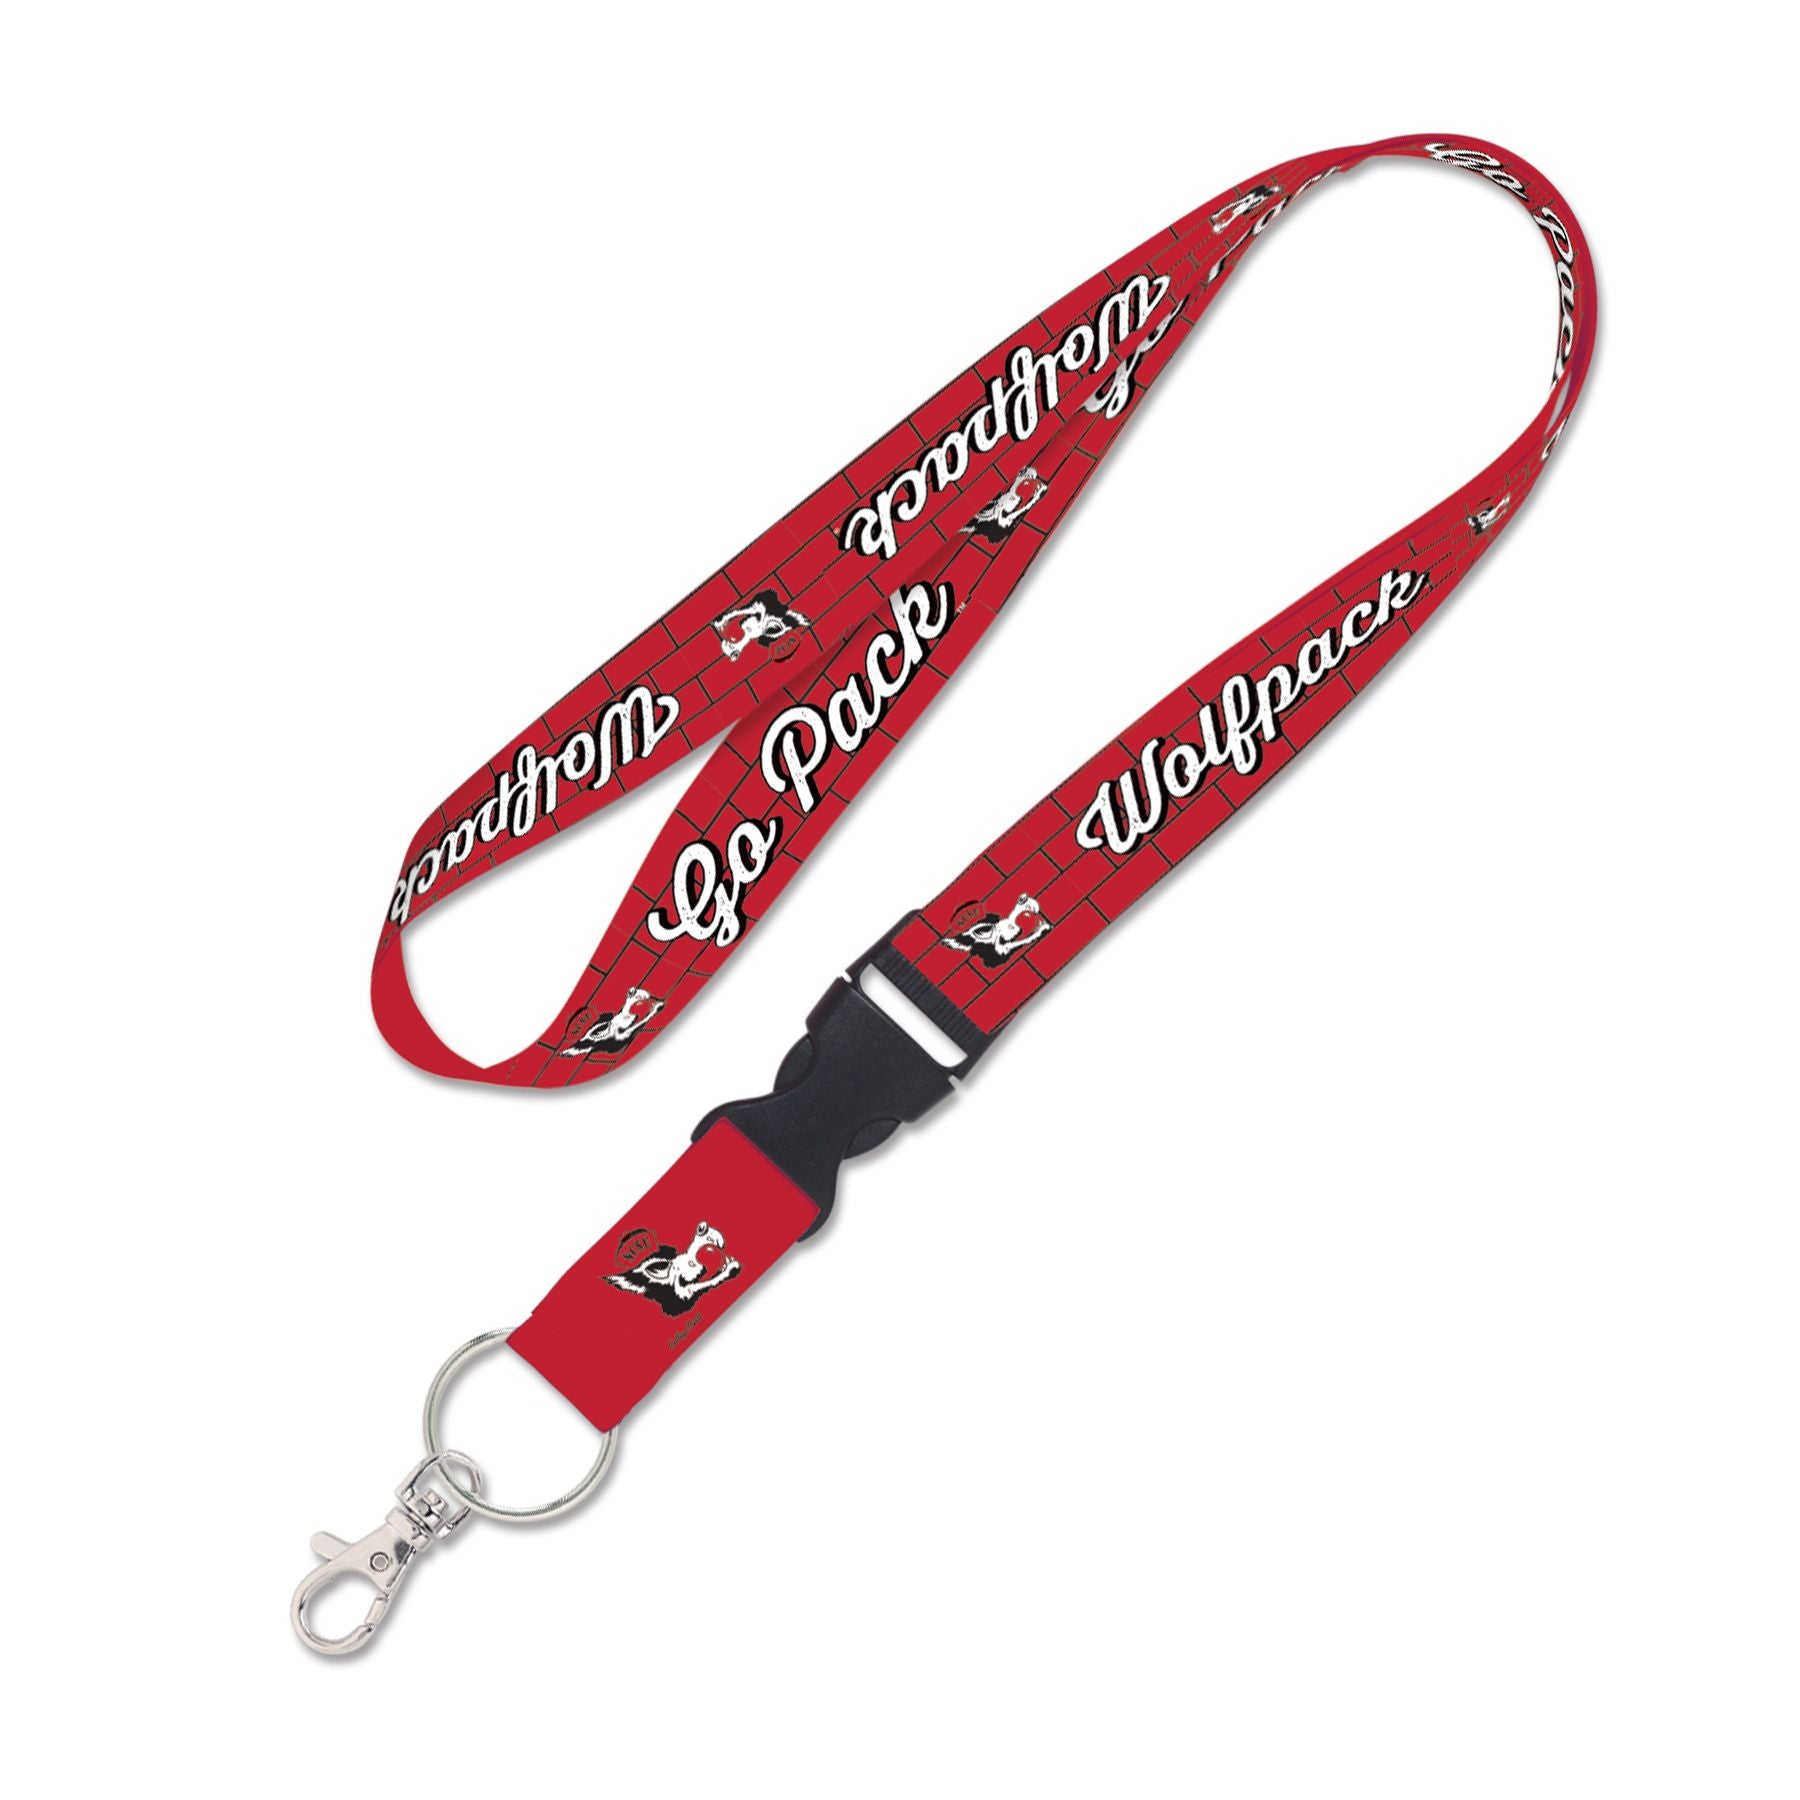 NC State Wolfpack Red Slobbering Wolf Lanyard w/ Buckle Release